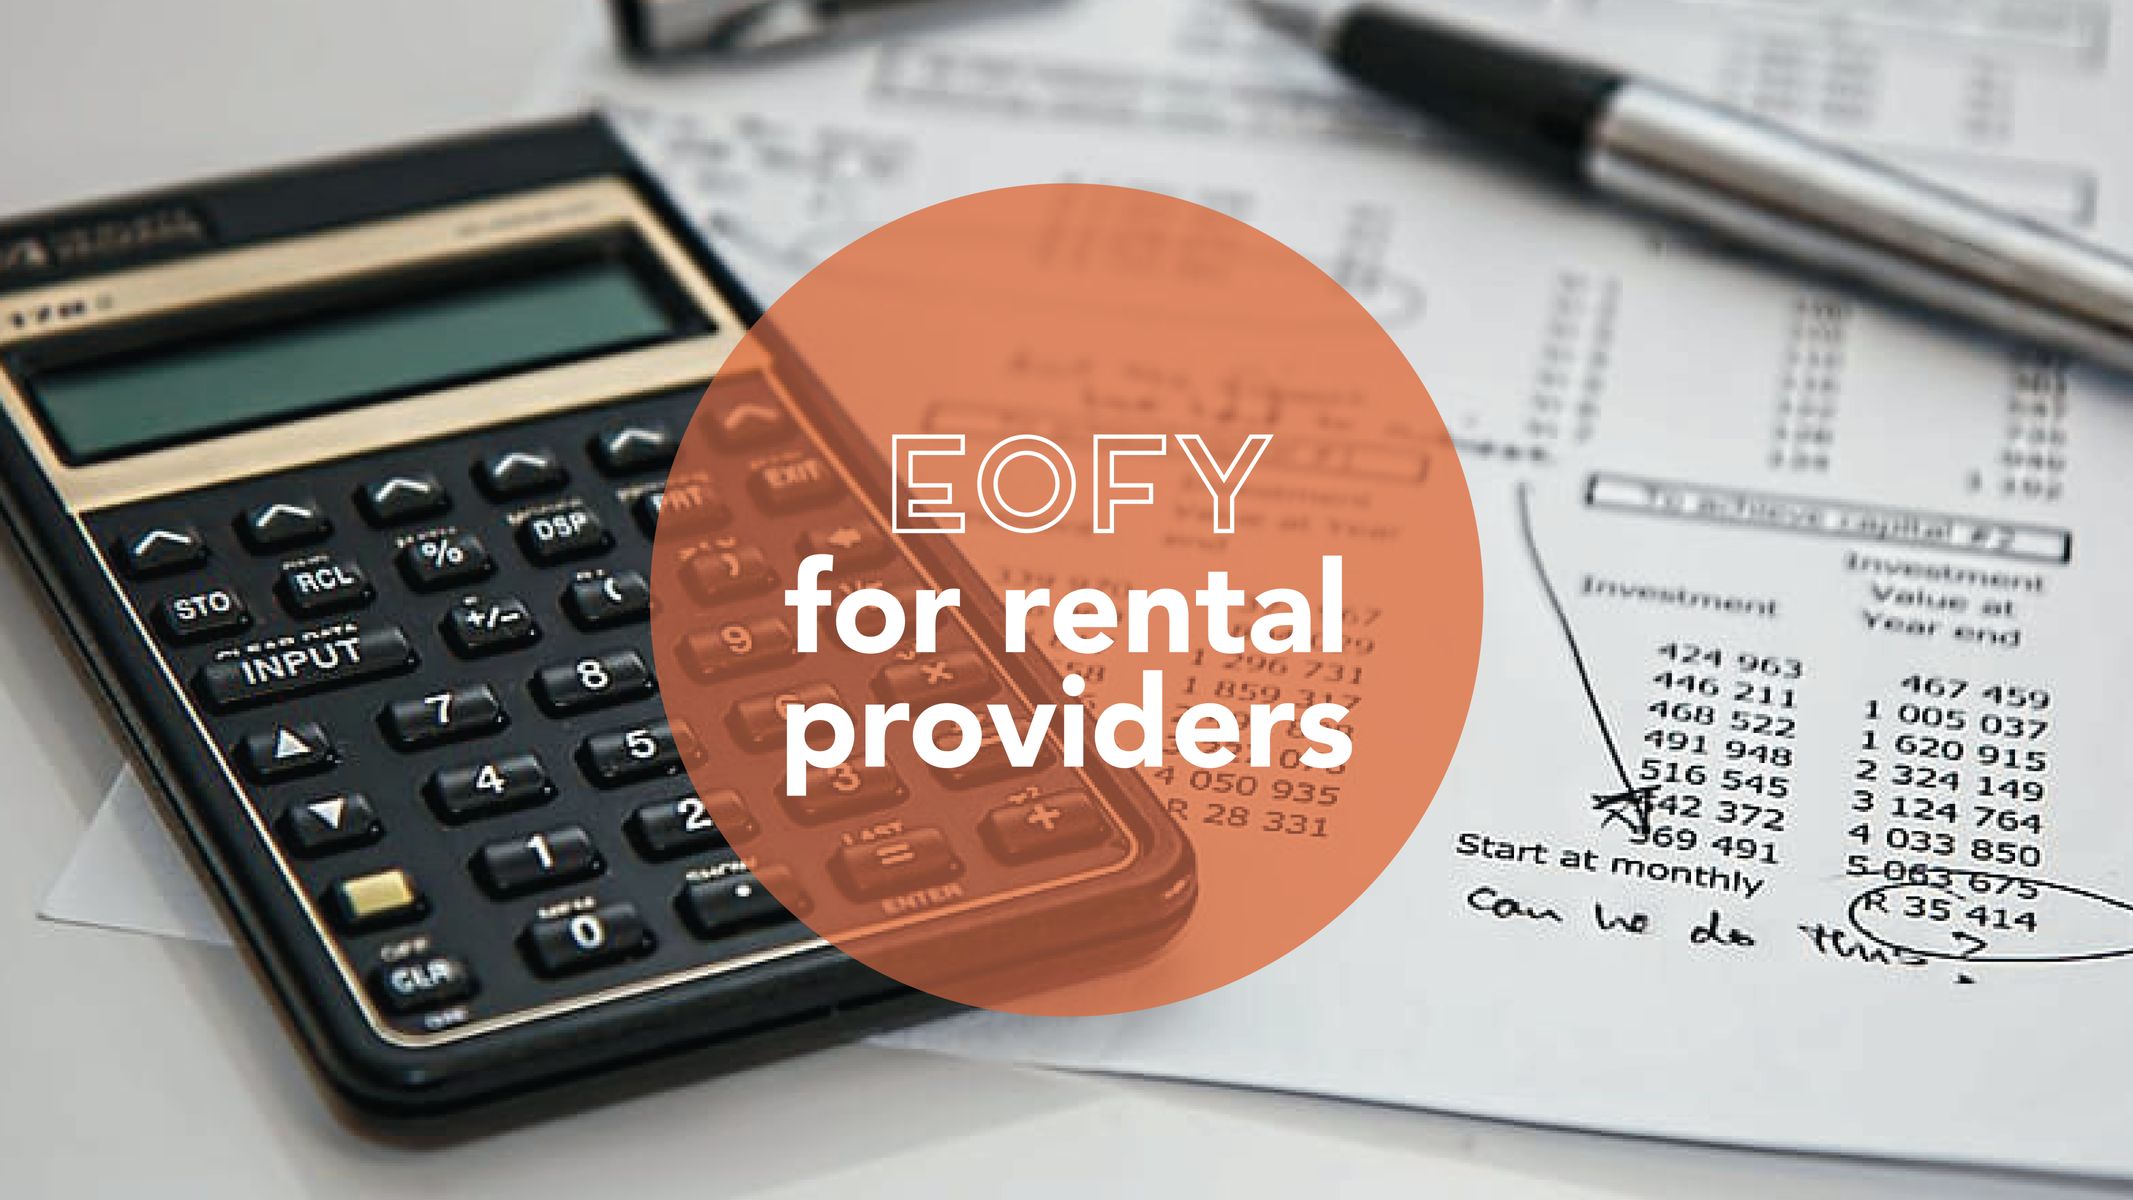 What the EOFY means for Rental Providers